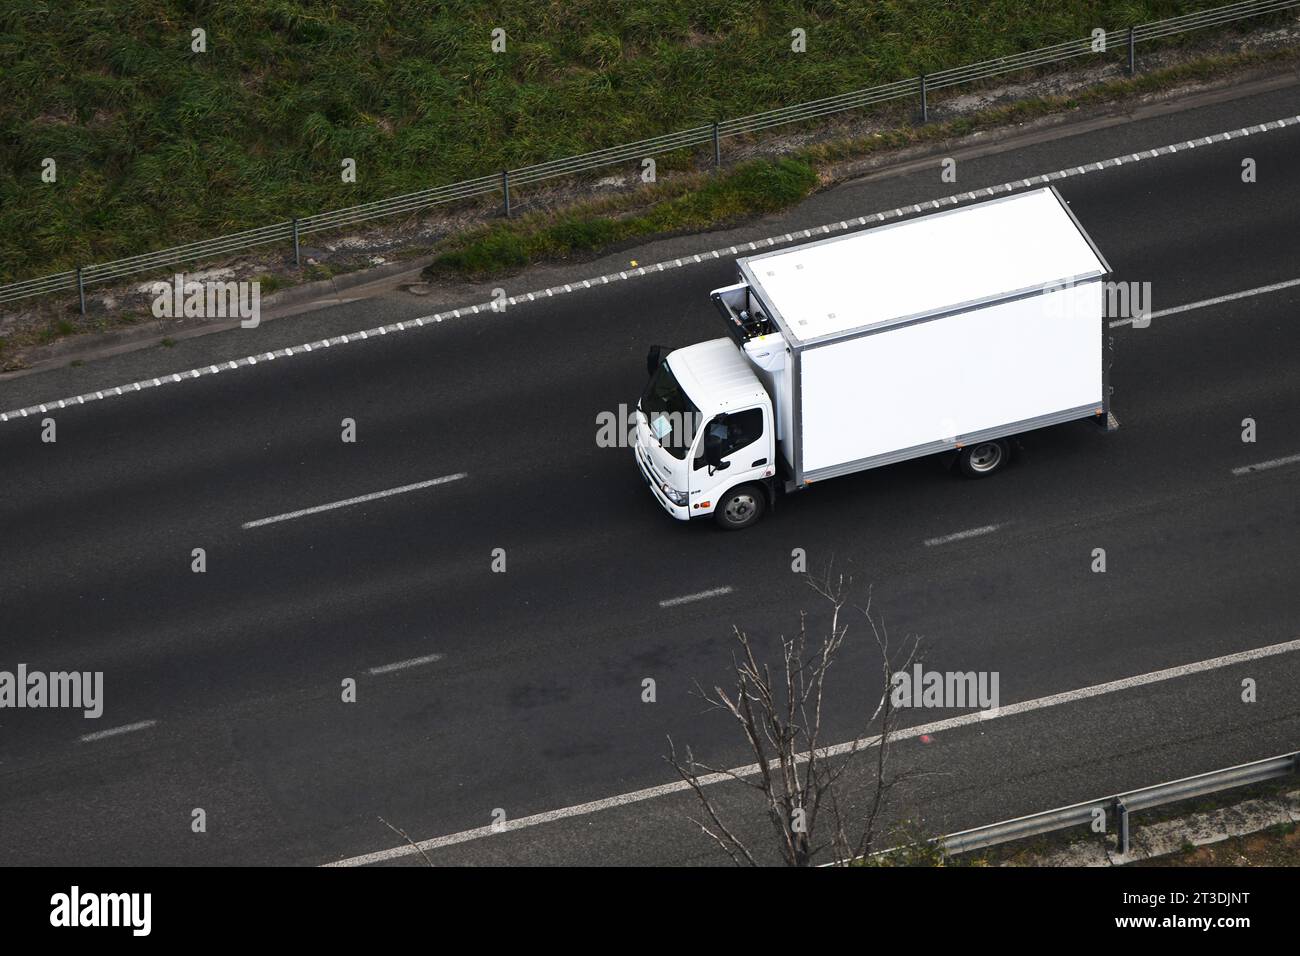 Aerial view of a white cold storage delivery truck on a highway, showcasing transportation and distribution. Stock Photo